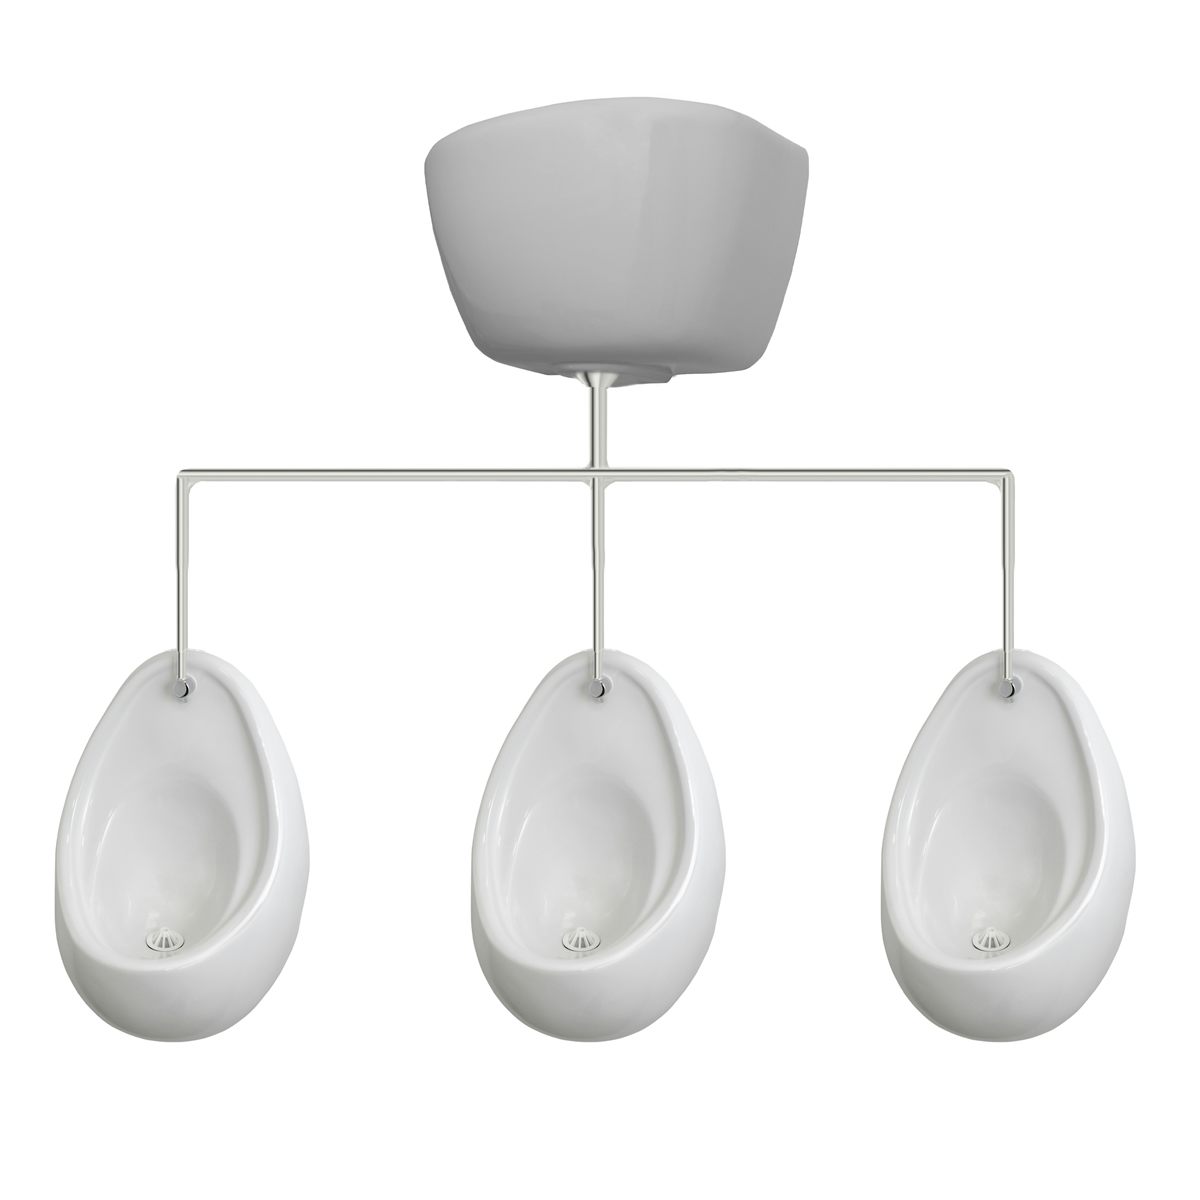 Kirke Curve complete top in concealed urinal 600mm pack for 3 bowls